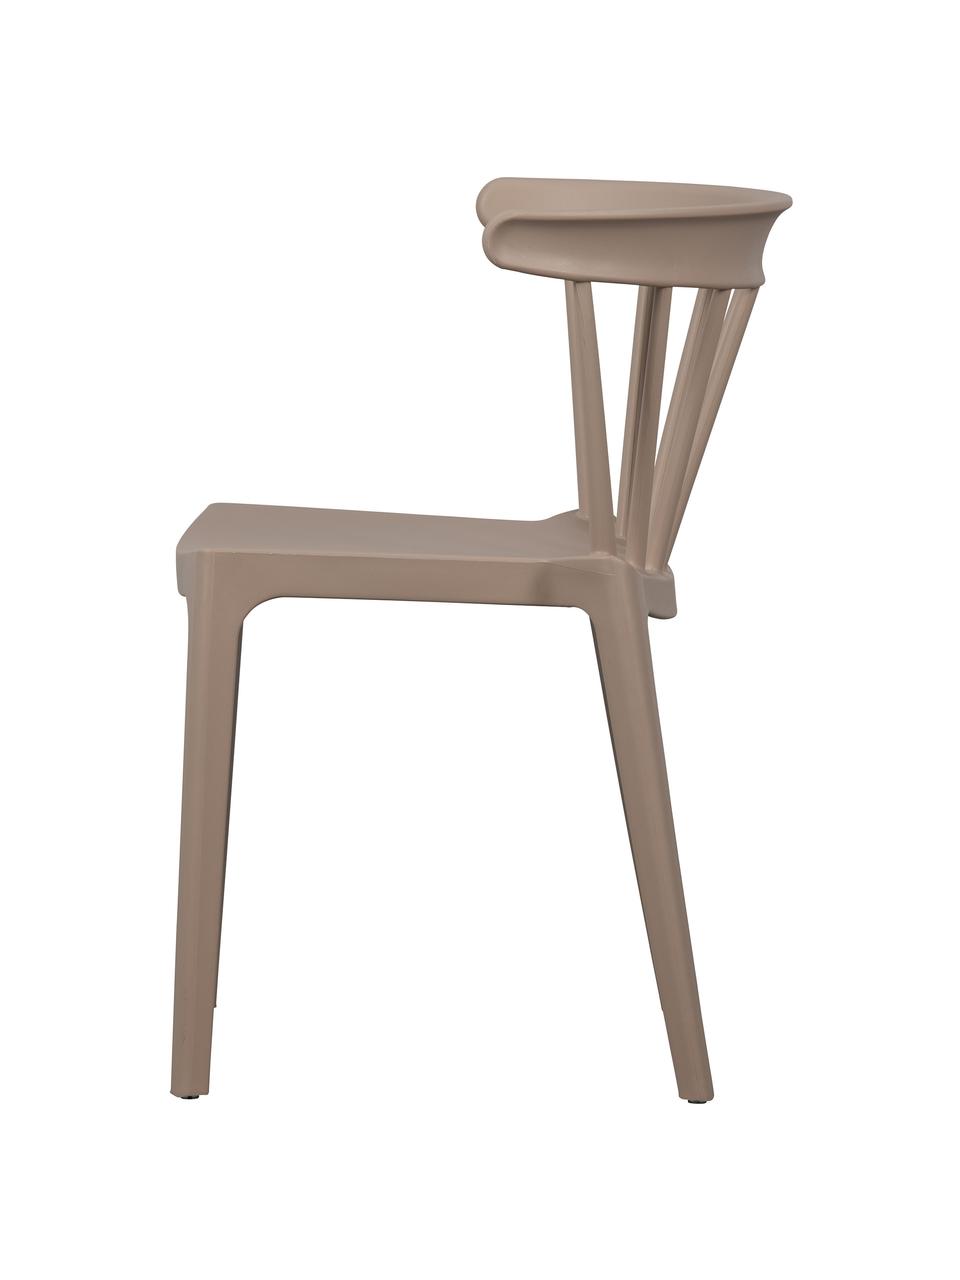 Stapelbare tuinstoel Bliss in taupe, Polypropyleen, Taupe, B 52 x D 53 cm